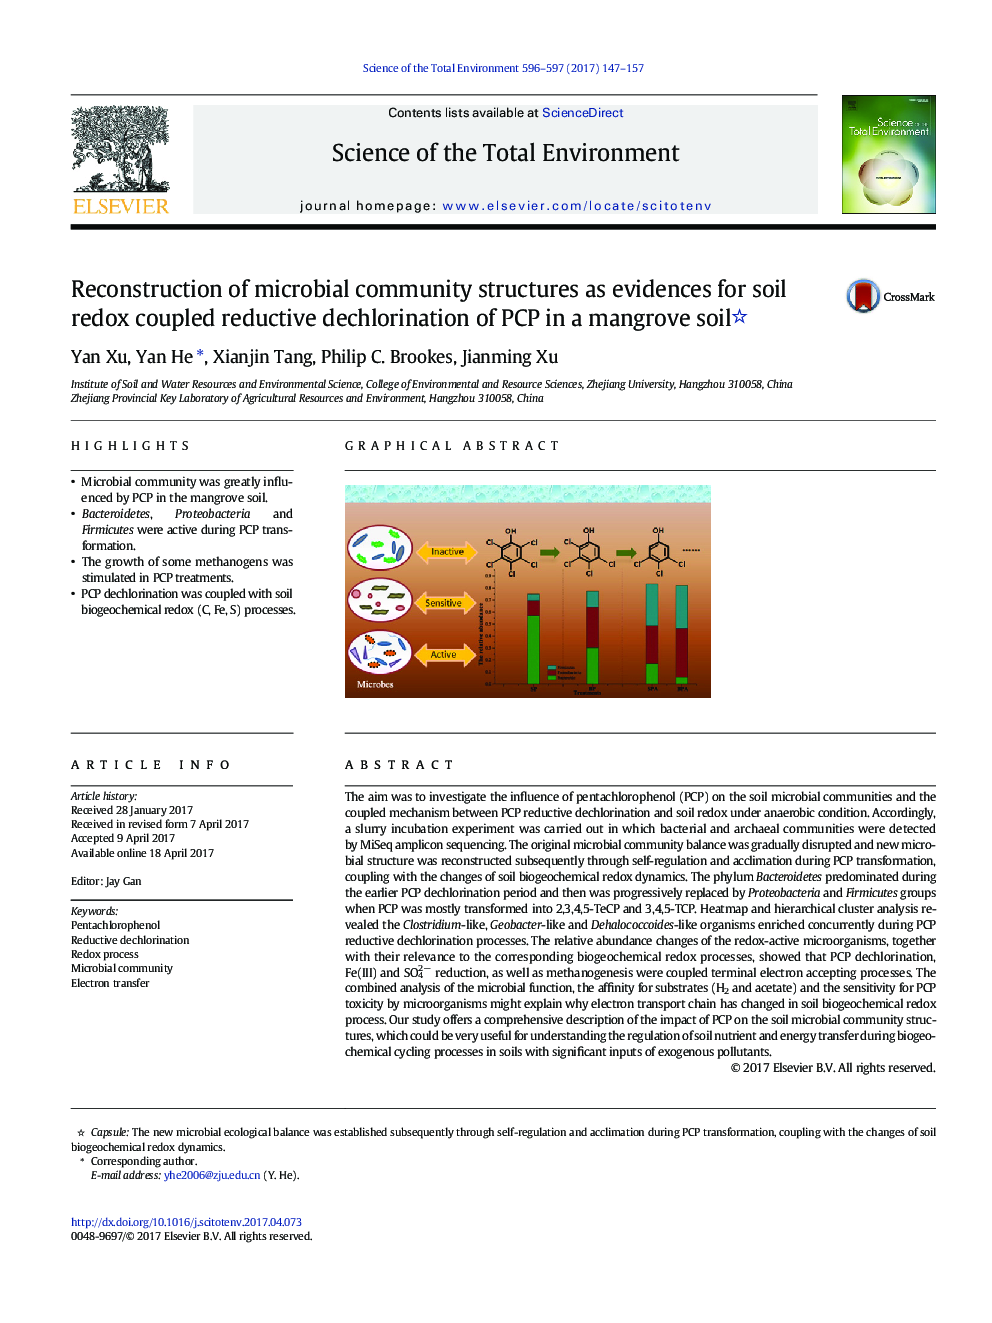 Reconstruction of microbial community structures as evidences for soil redox coupled reductive dechlorination of PCP in a mangrove soil